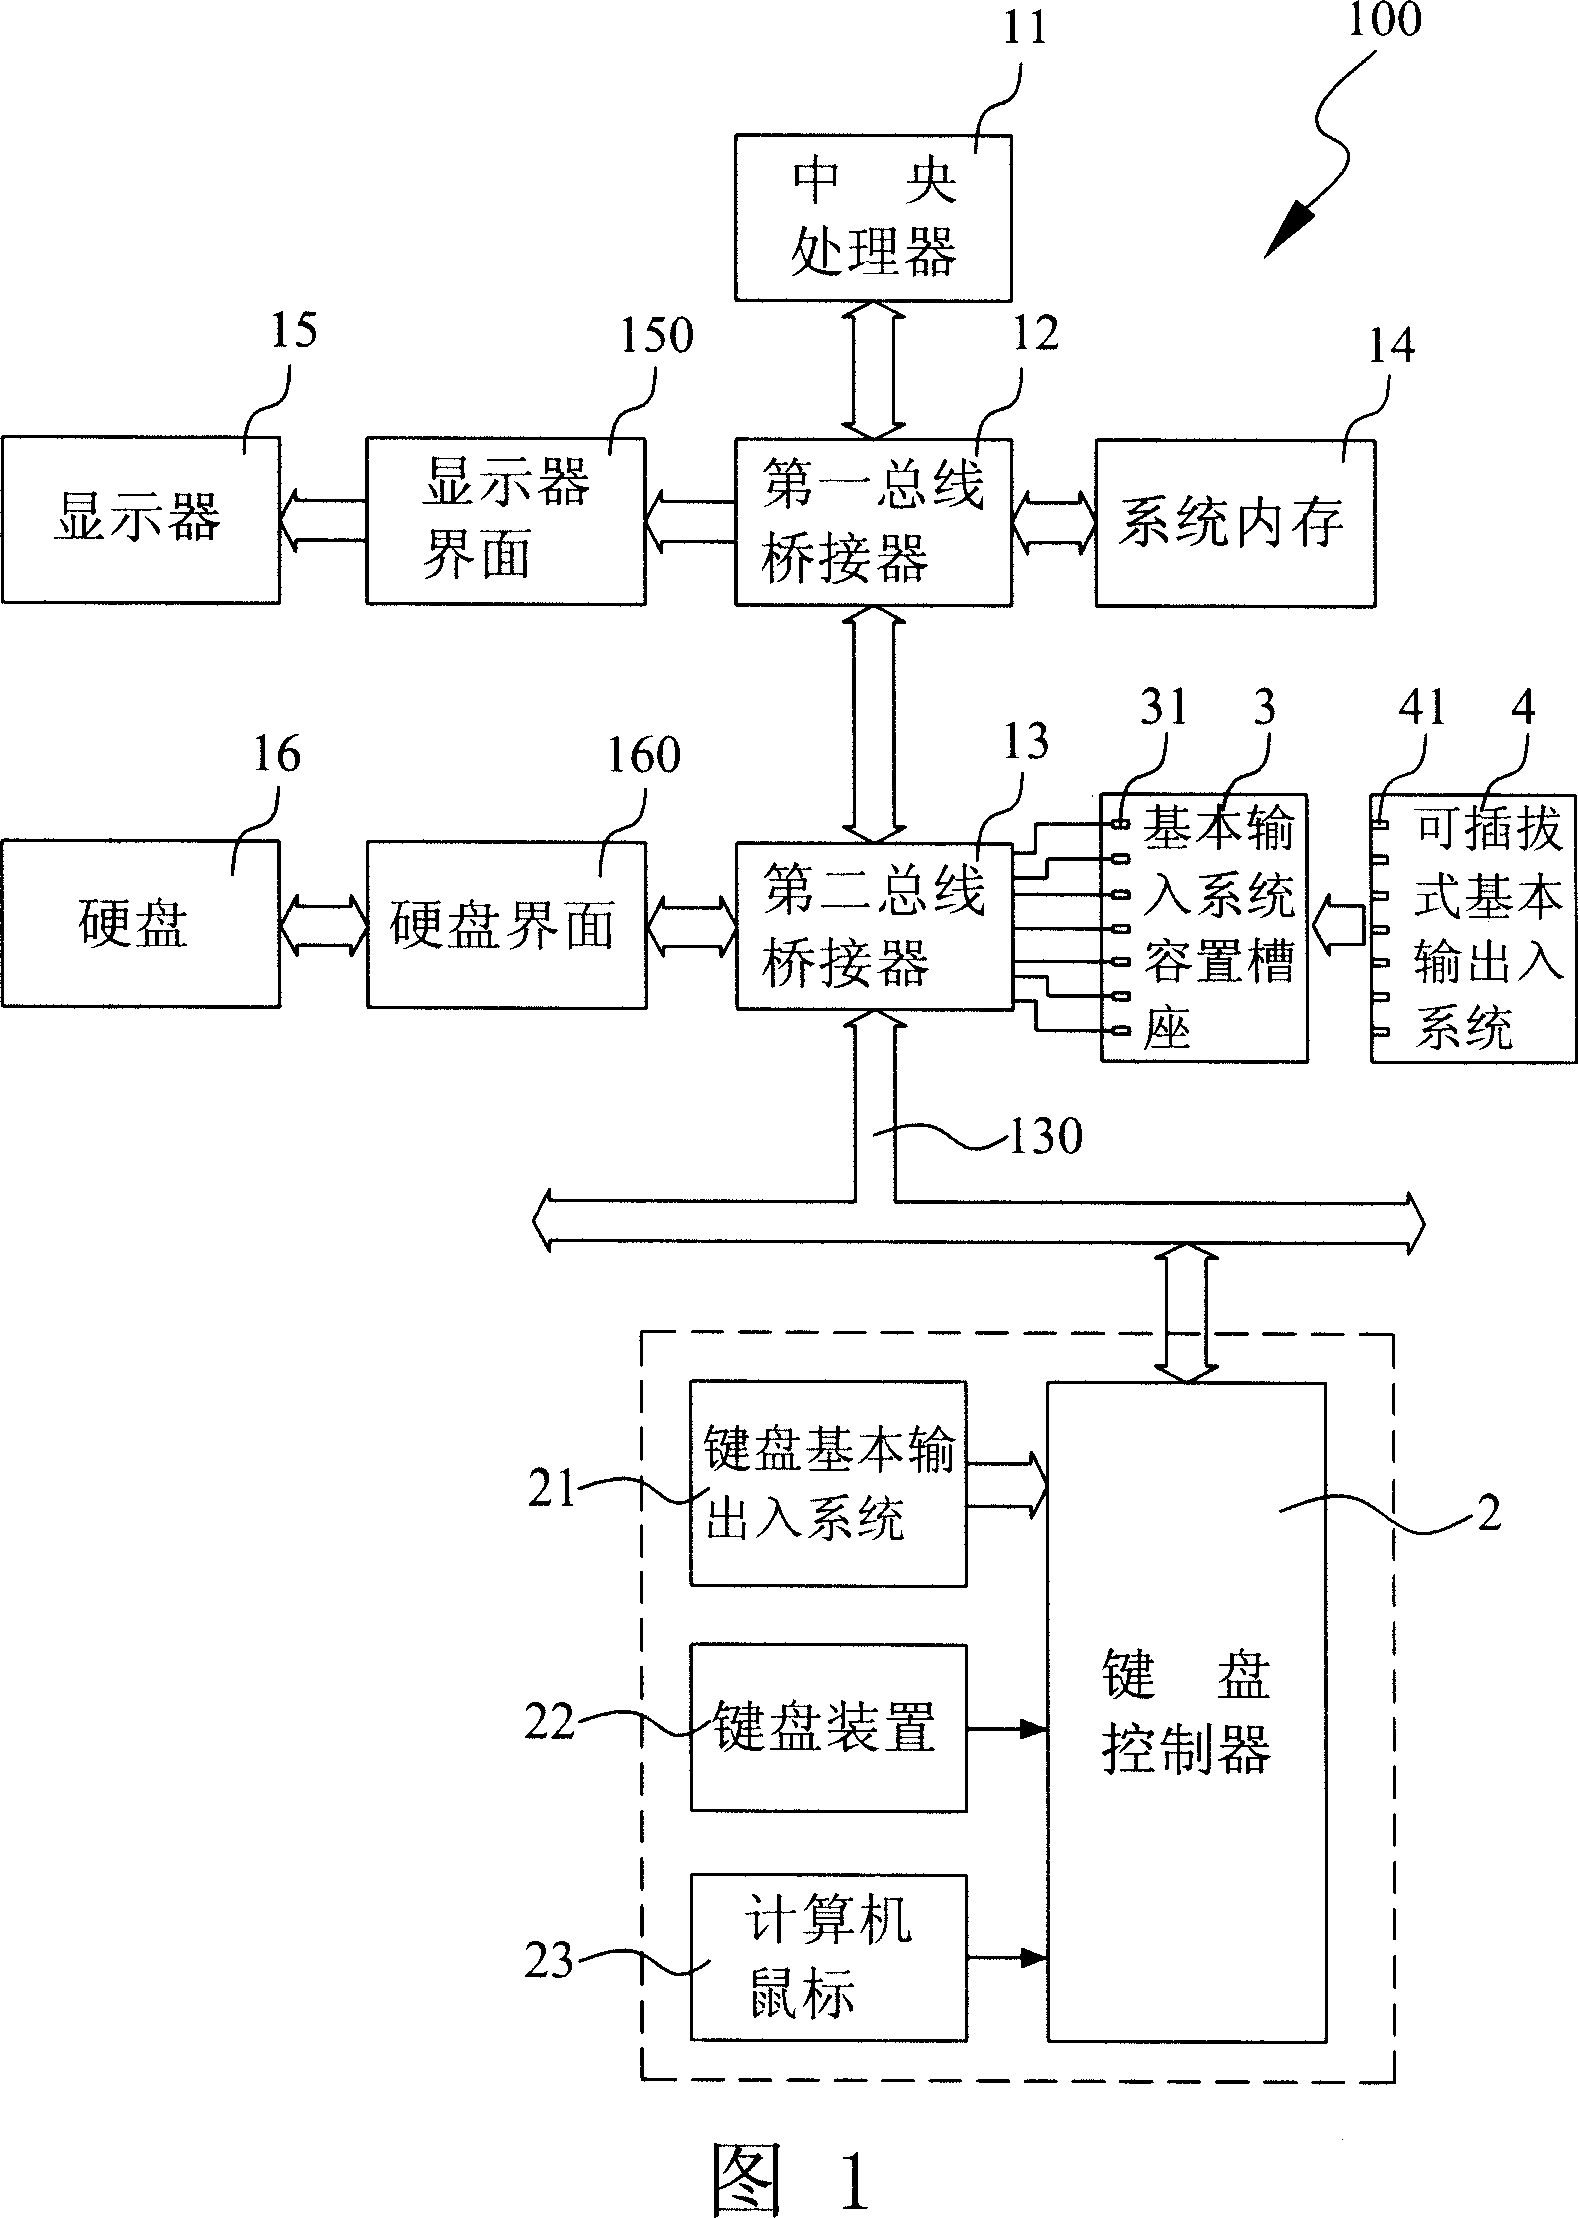 Computer device with plug-in type ROM-BIOS